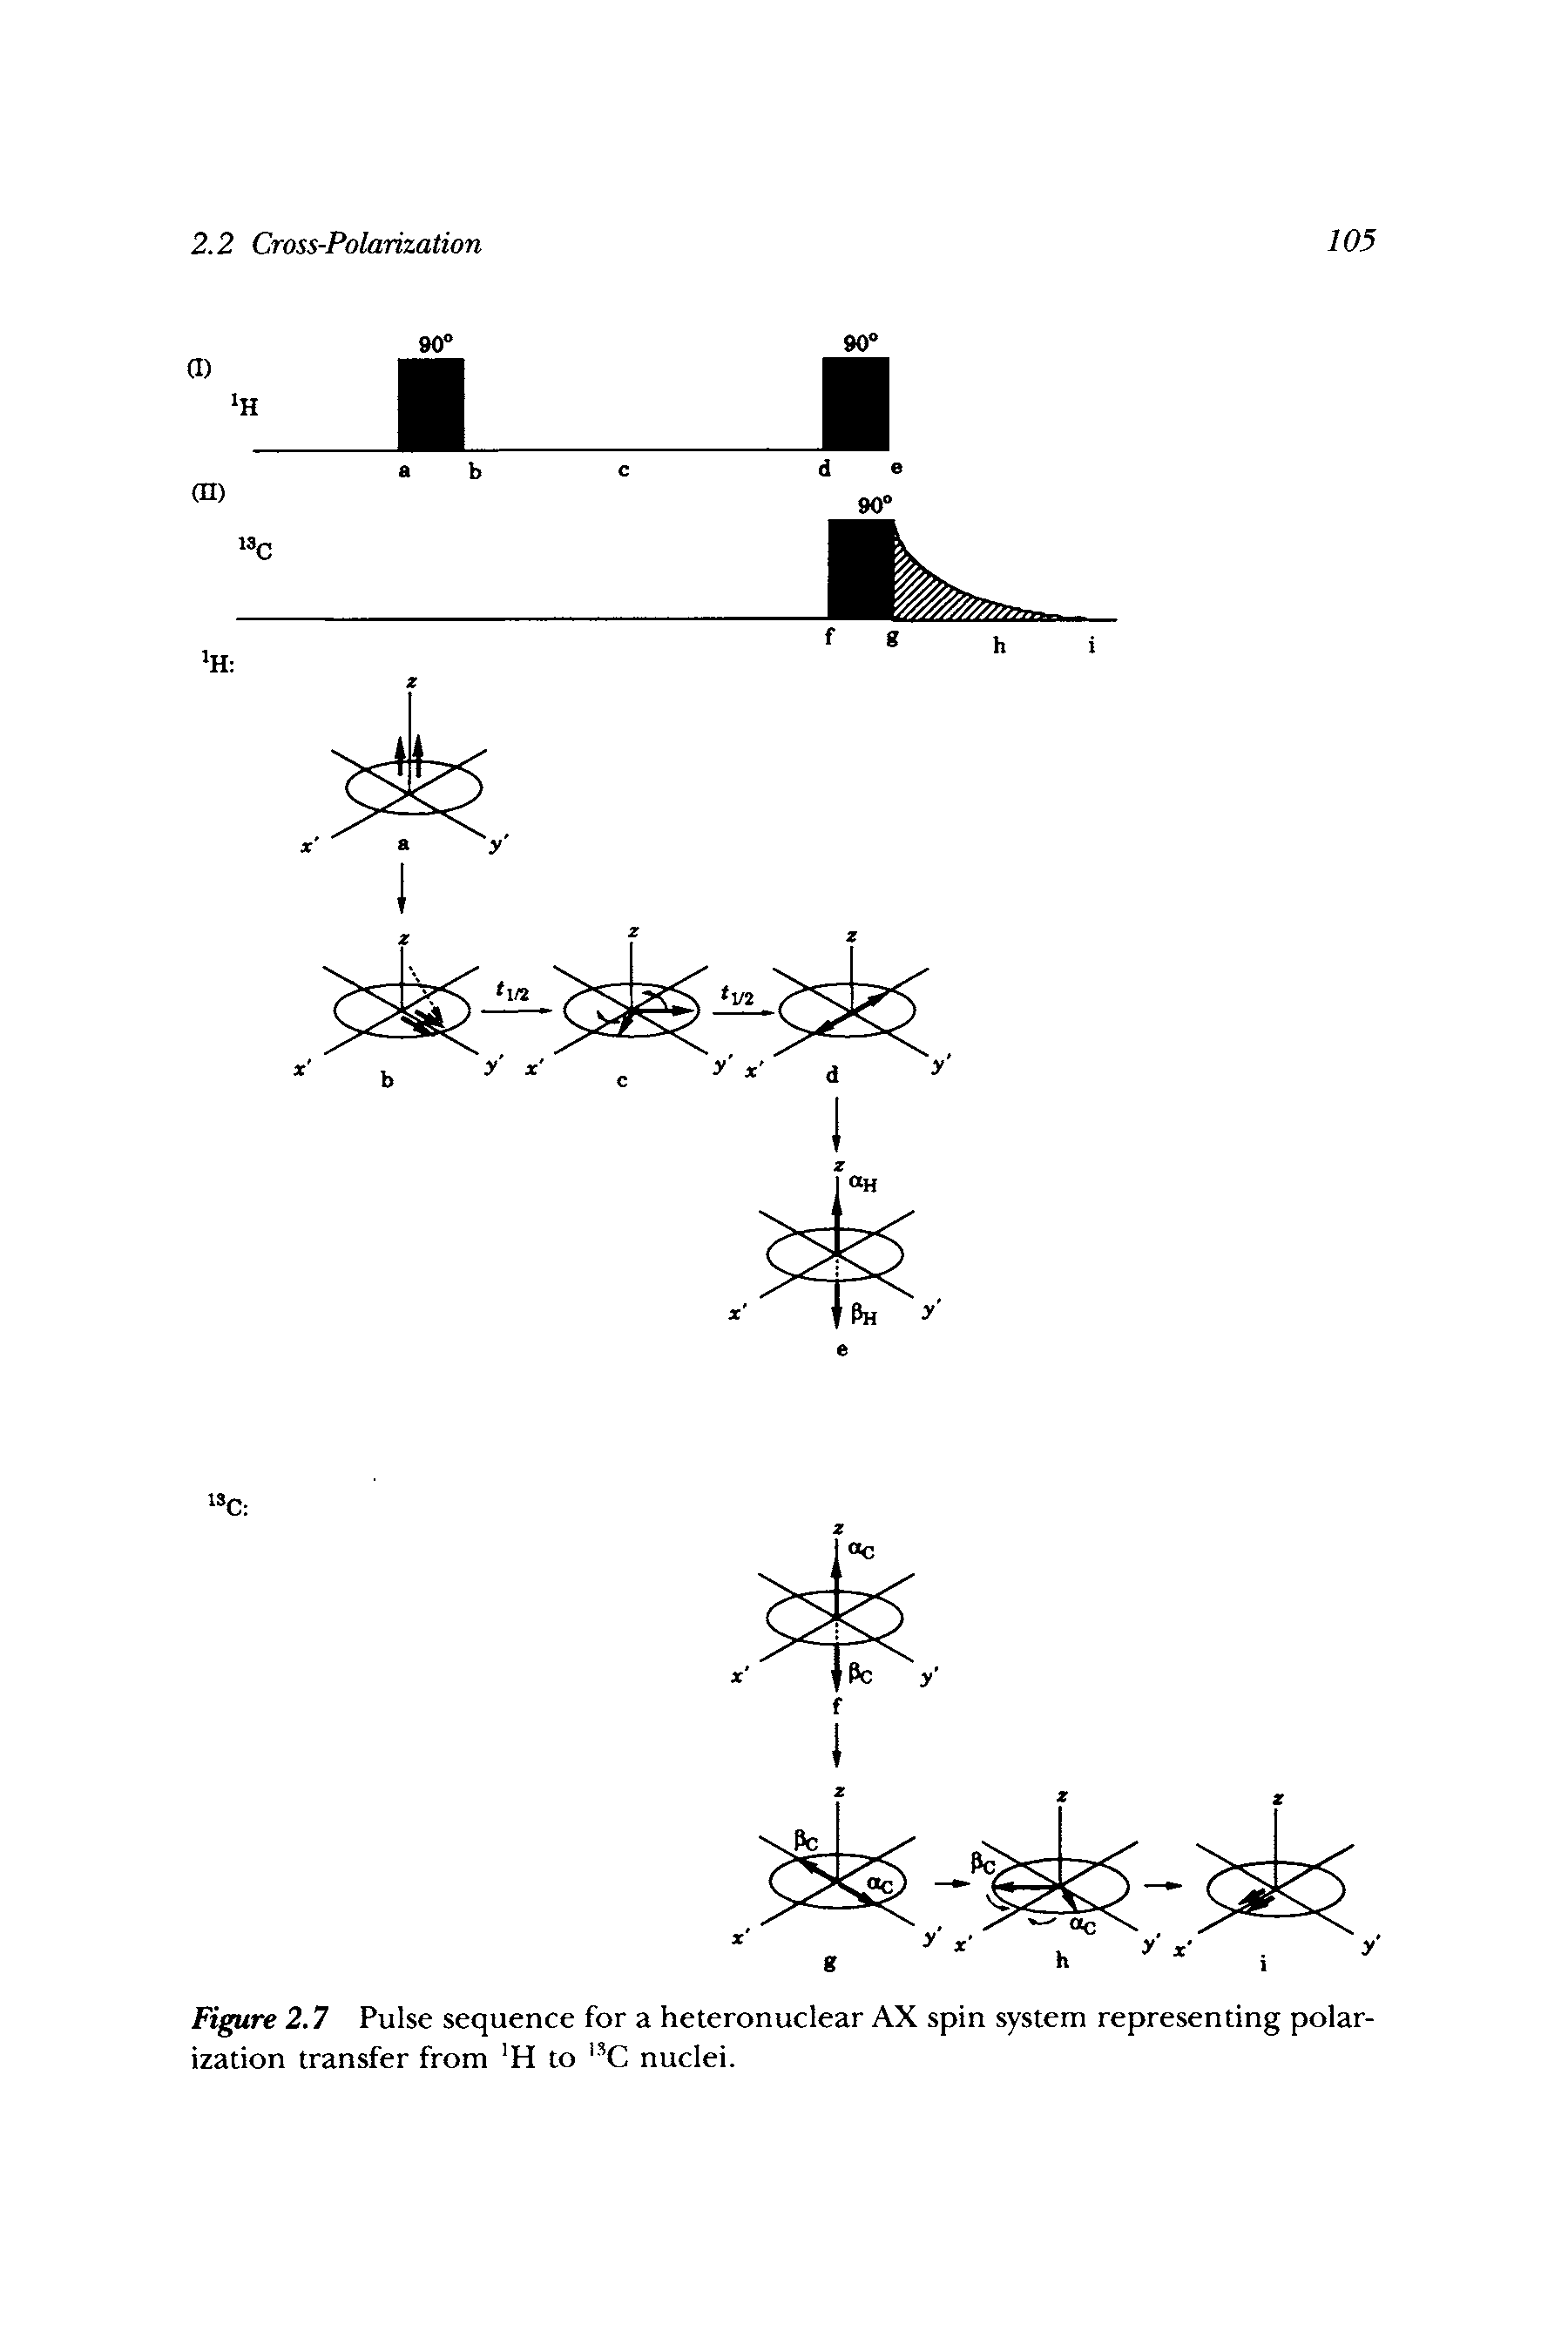 Figure 2.7 Pulse sequence for a heteronuclear AX spin system representing polarization transfer from H to nuclei.